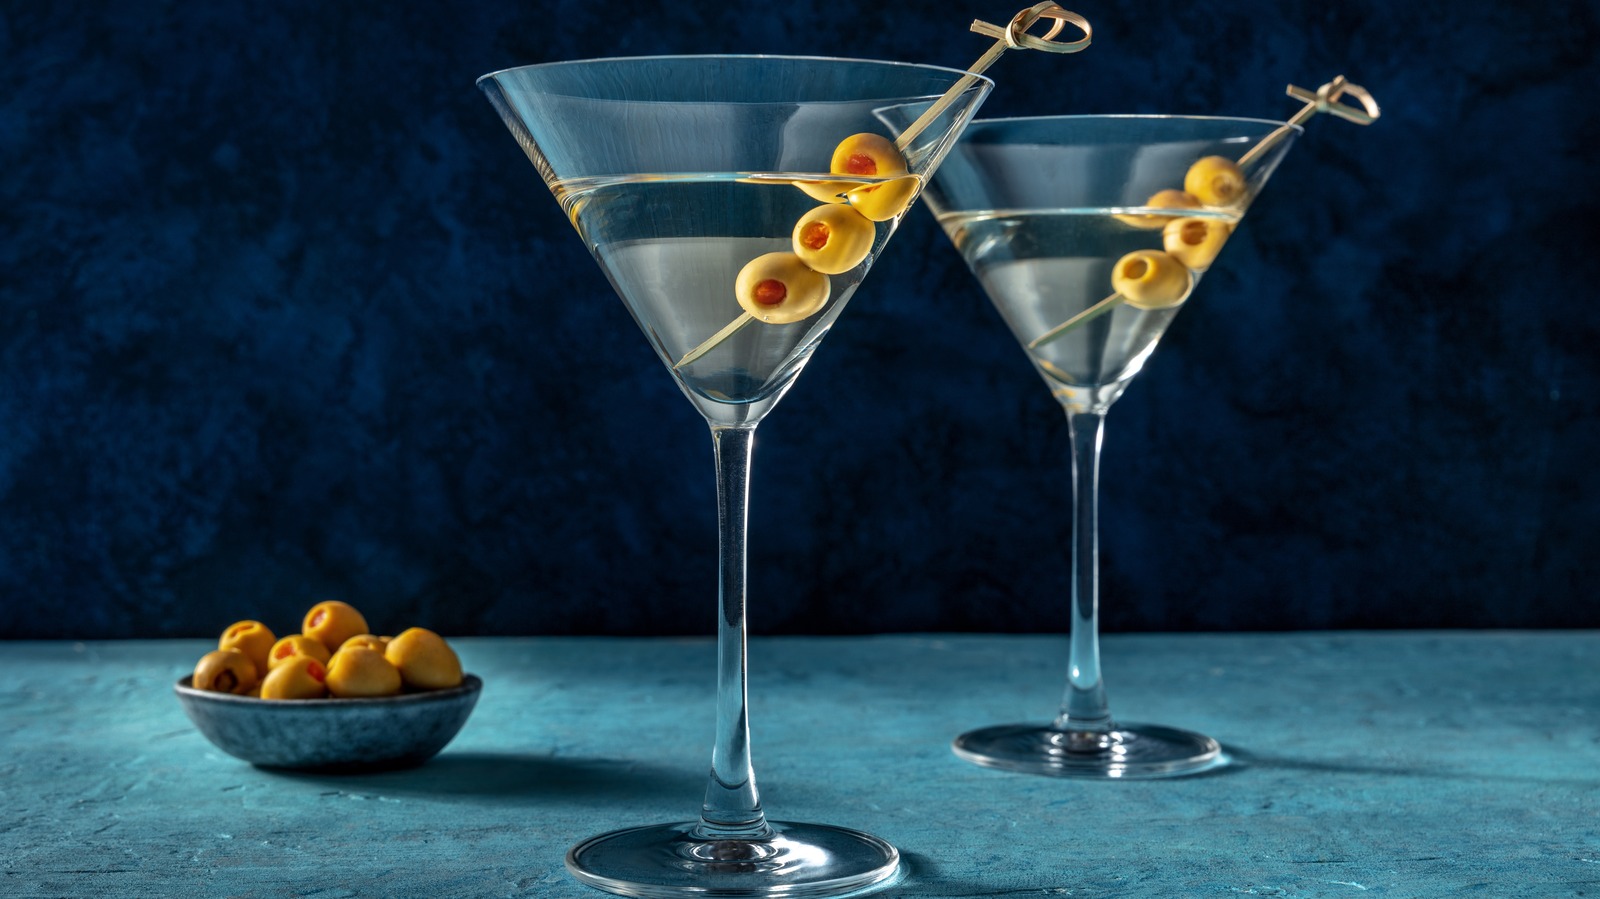 https://www.thedailymeal.com/img/gallery/the-clever-reason-behind-the-shape-of-the-iconic-martini-glass/l-intro-1678977585.jpg